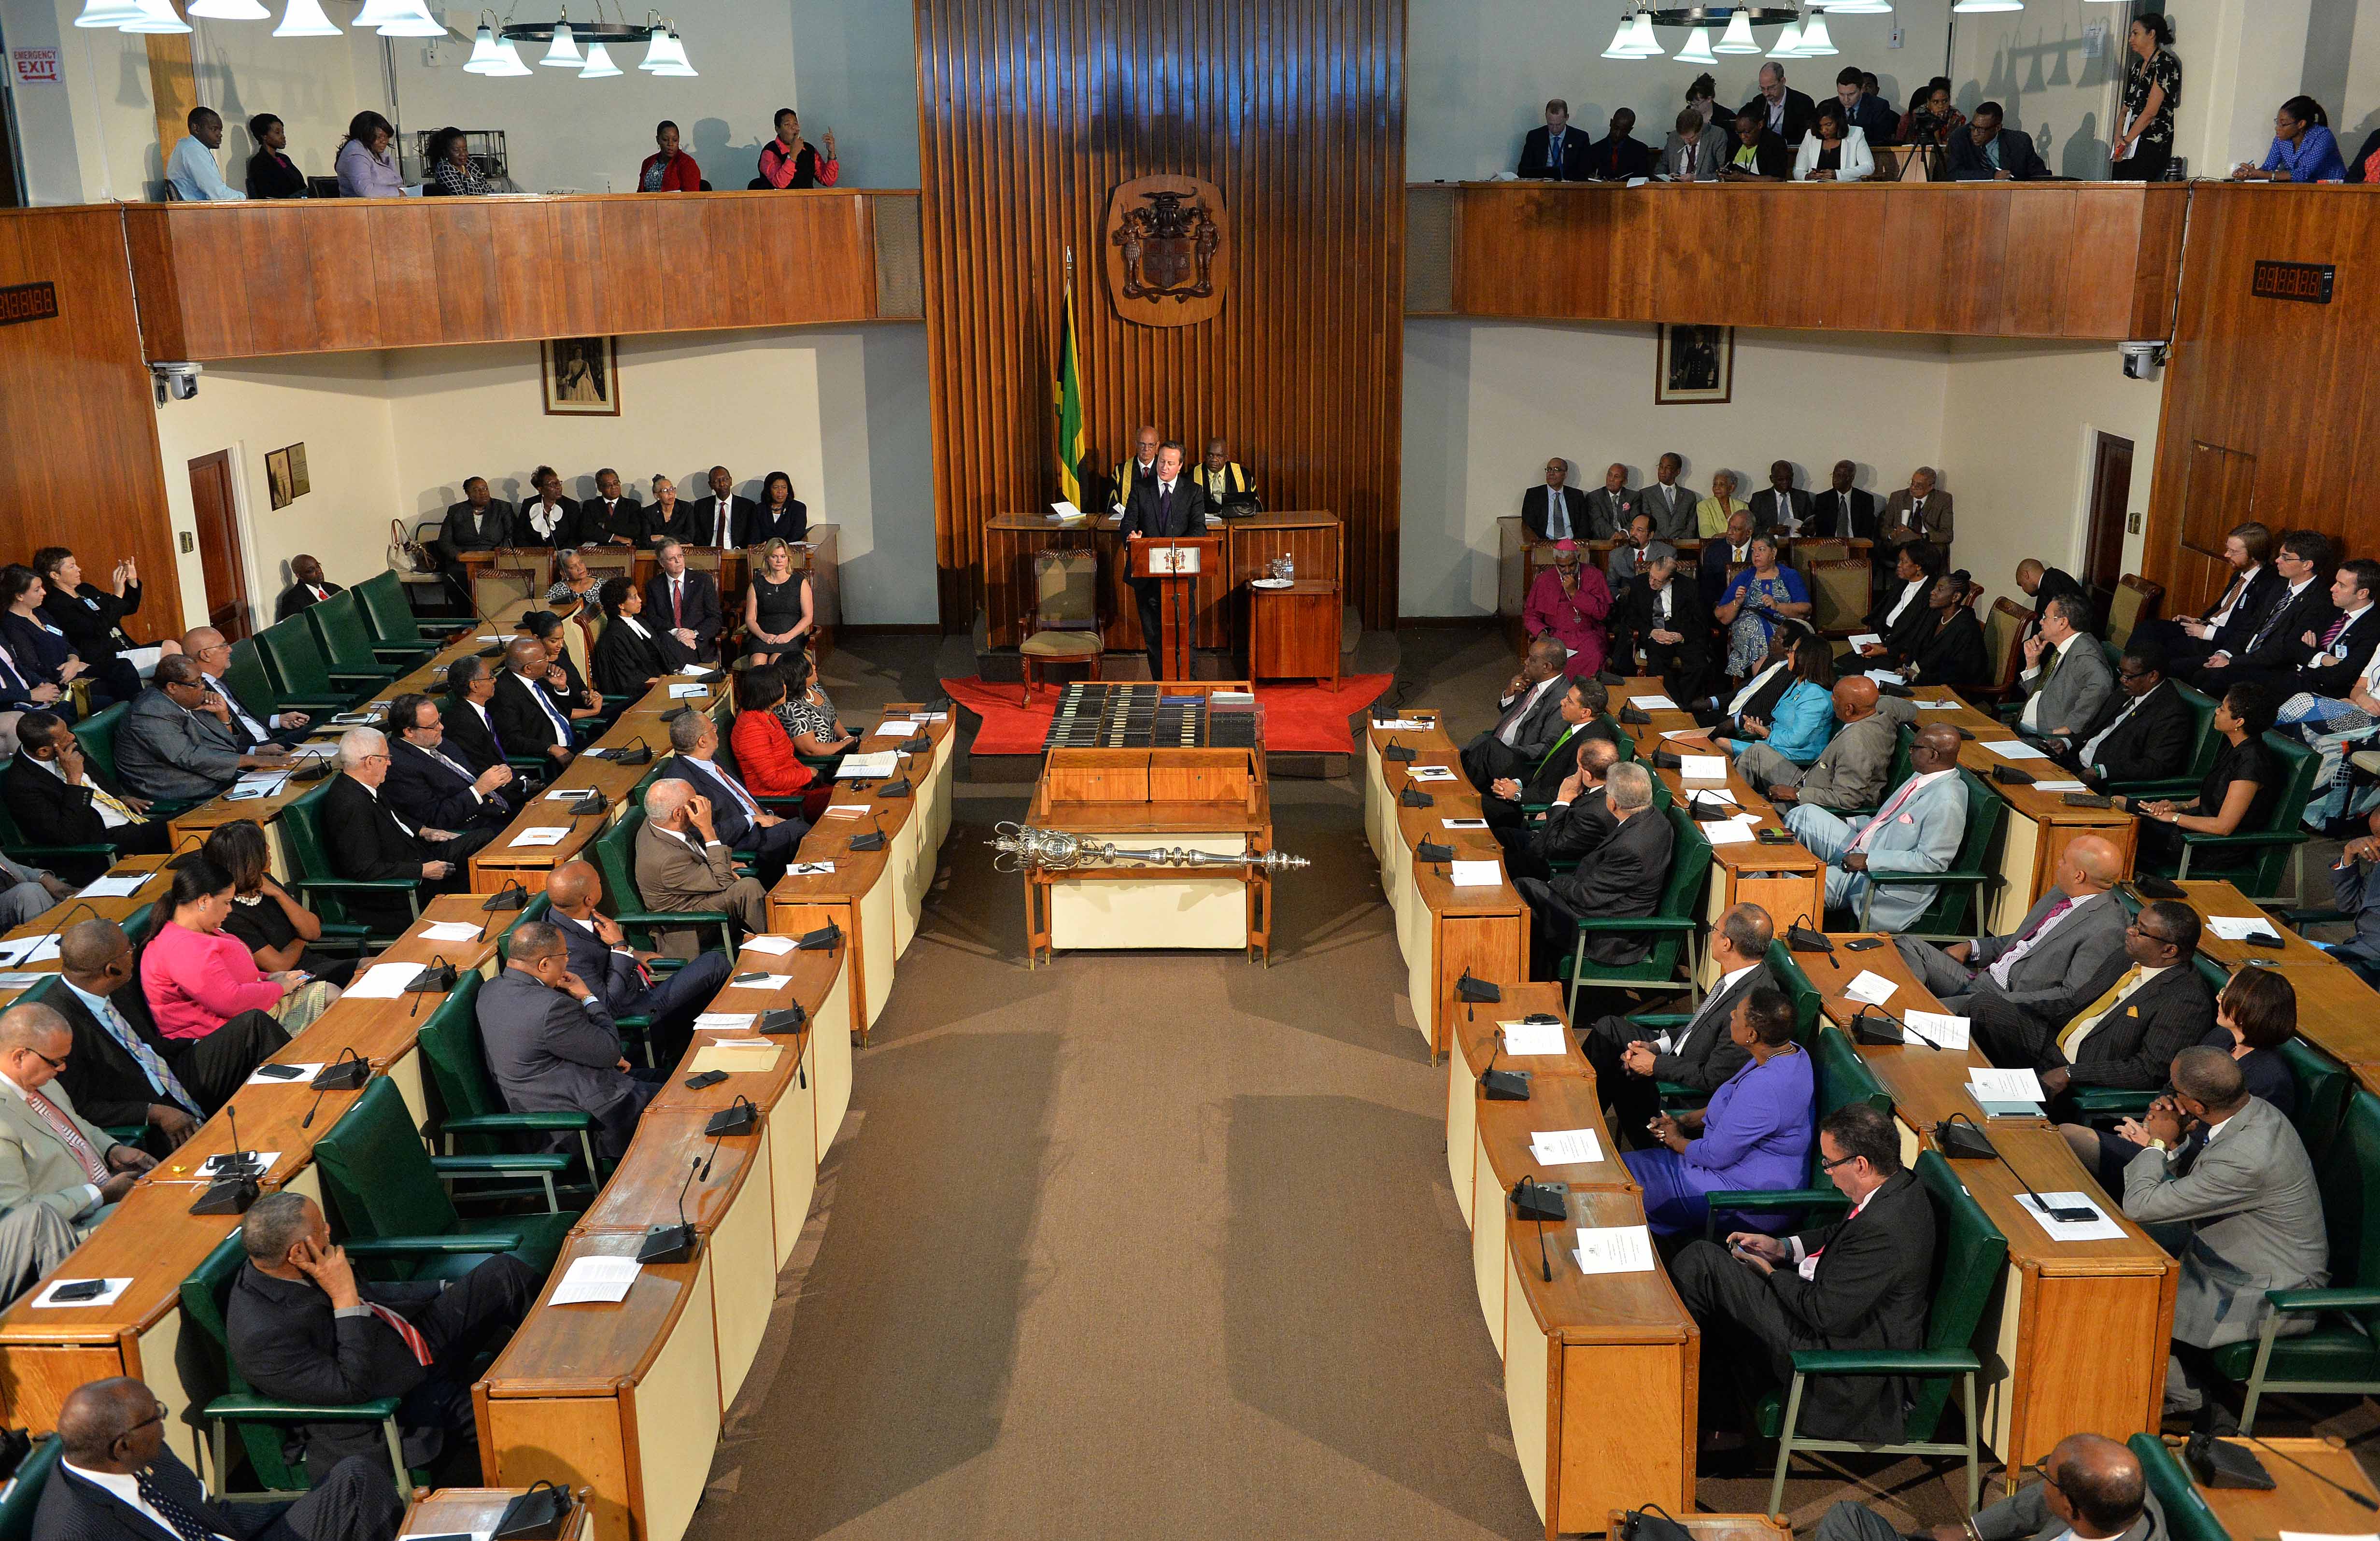 Parliament of Jamaica (photo credit: Number 10 / flickr)